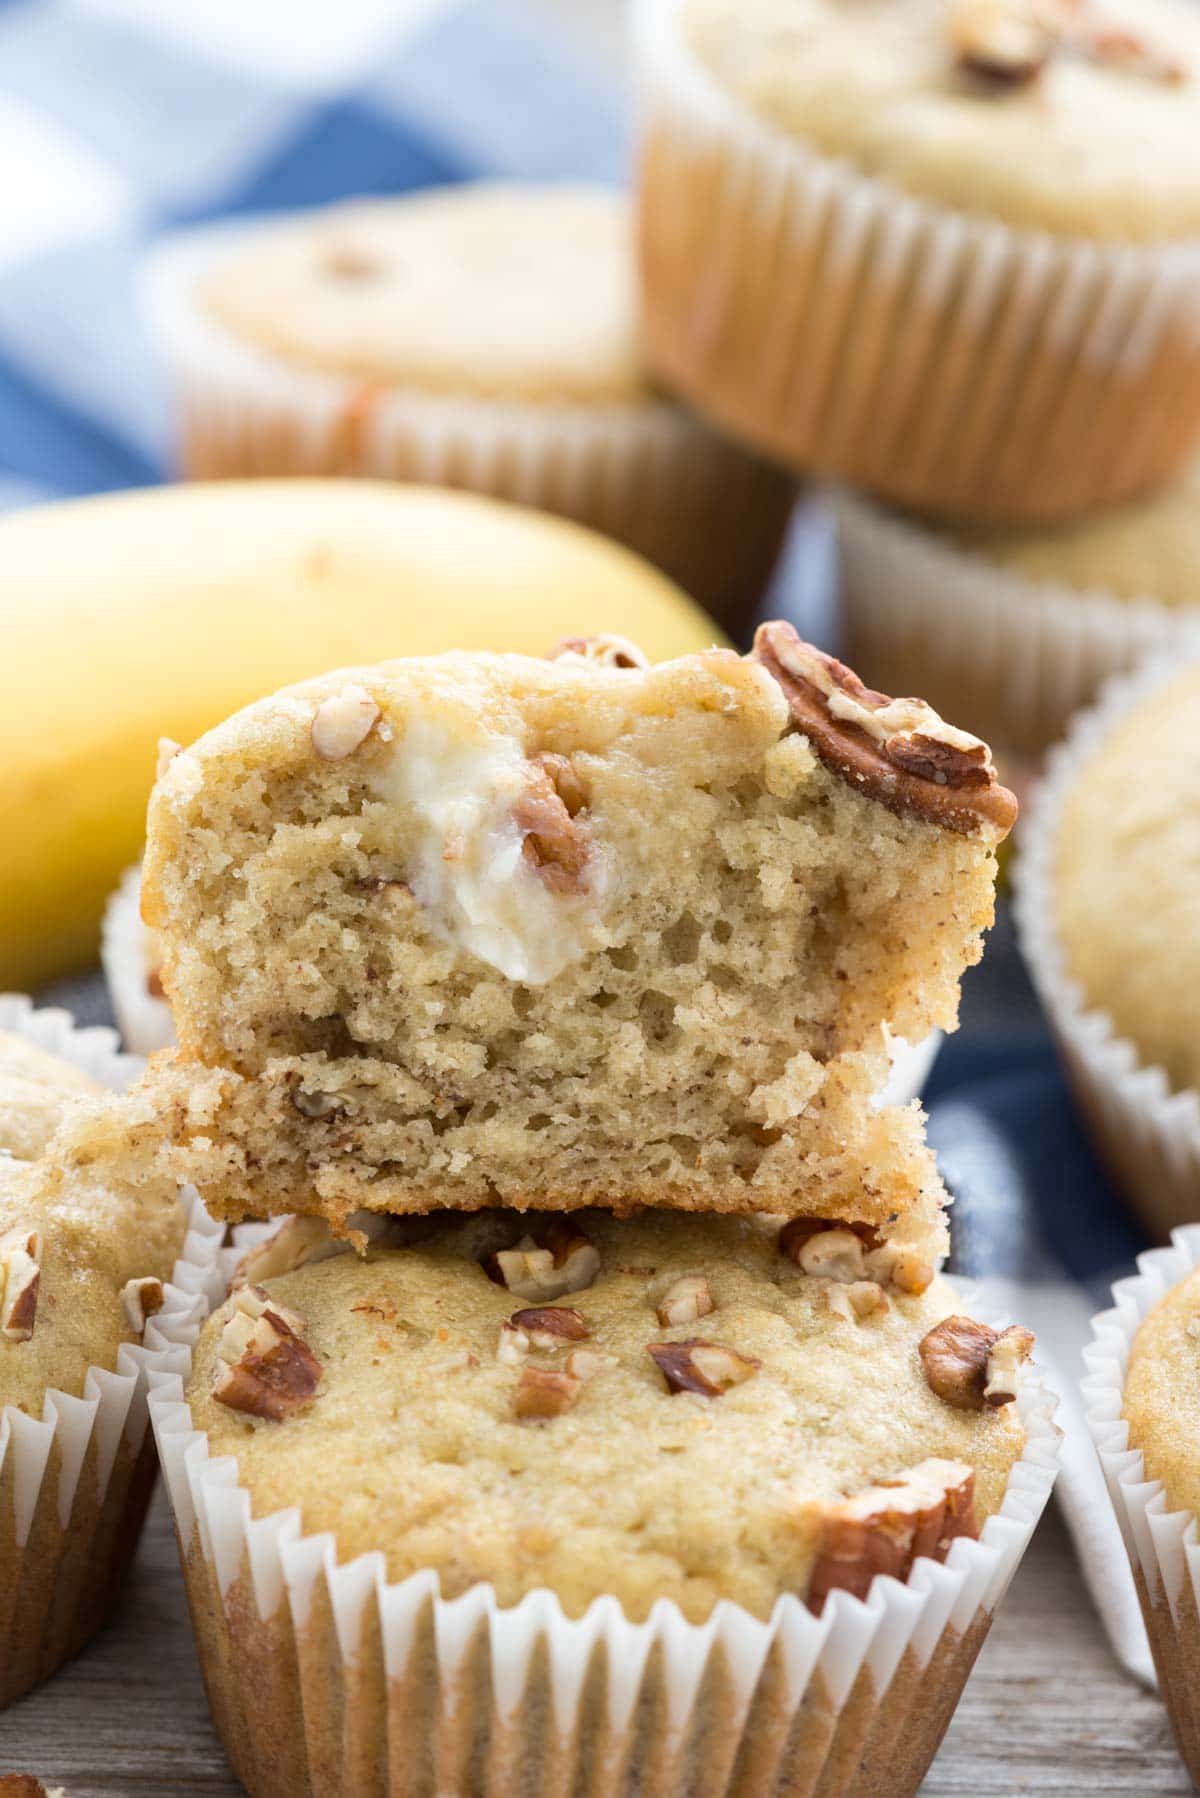 Cream Cheese Banana Muffins - this EASY banana muffin recipe is my favorite and it's FULL of a sweet cream cheese mixture! Everyone loves these muffins!